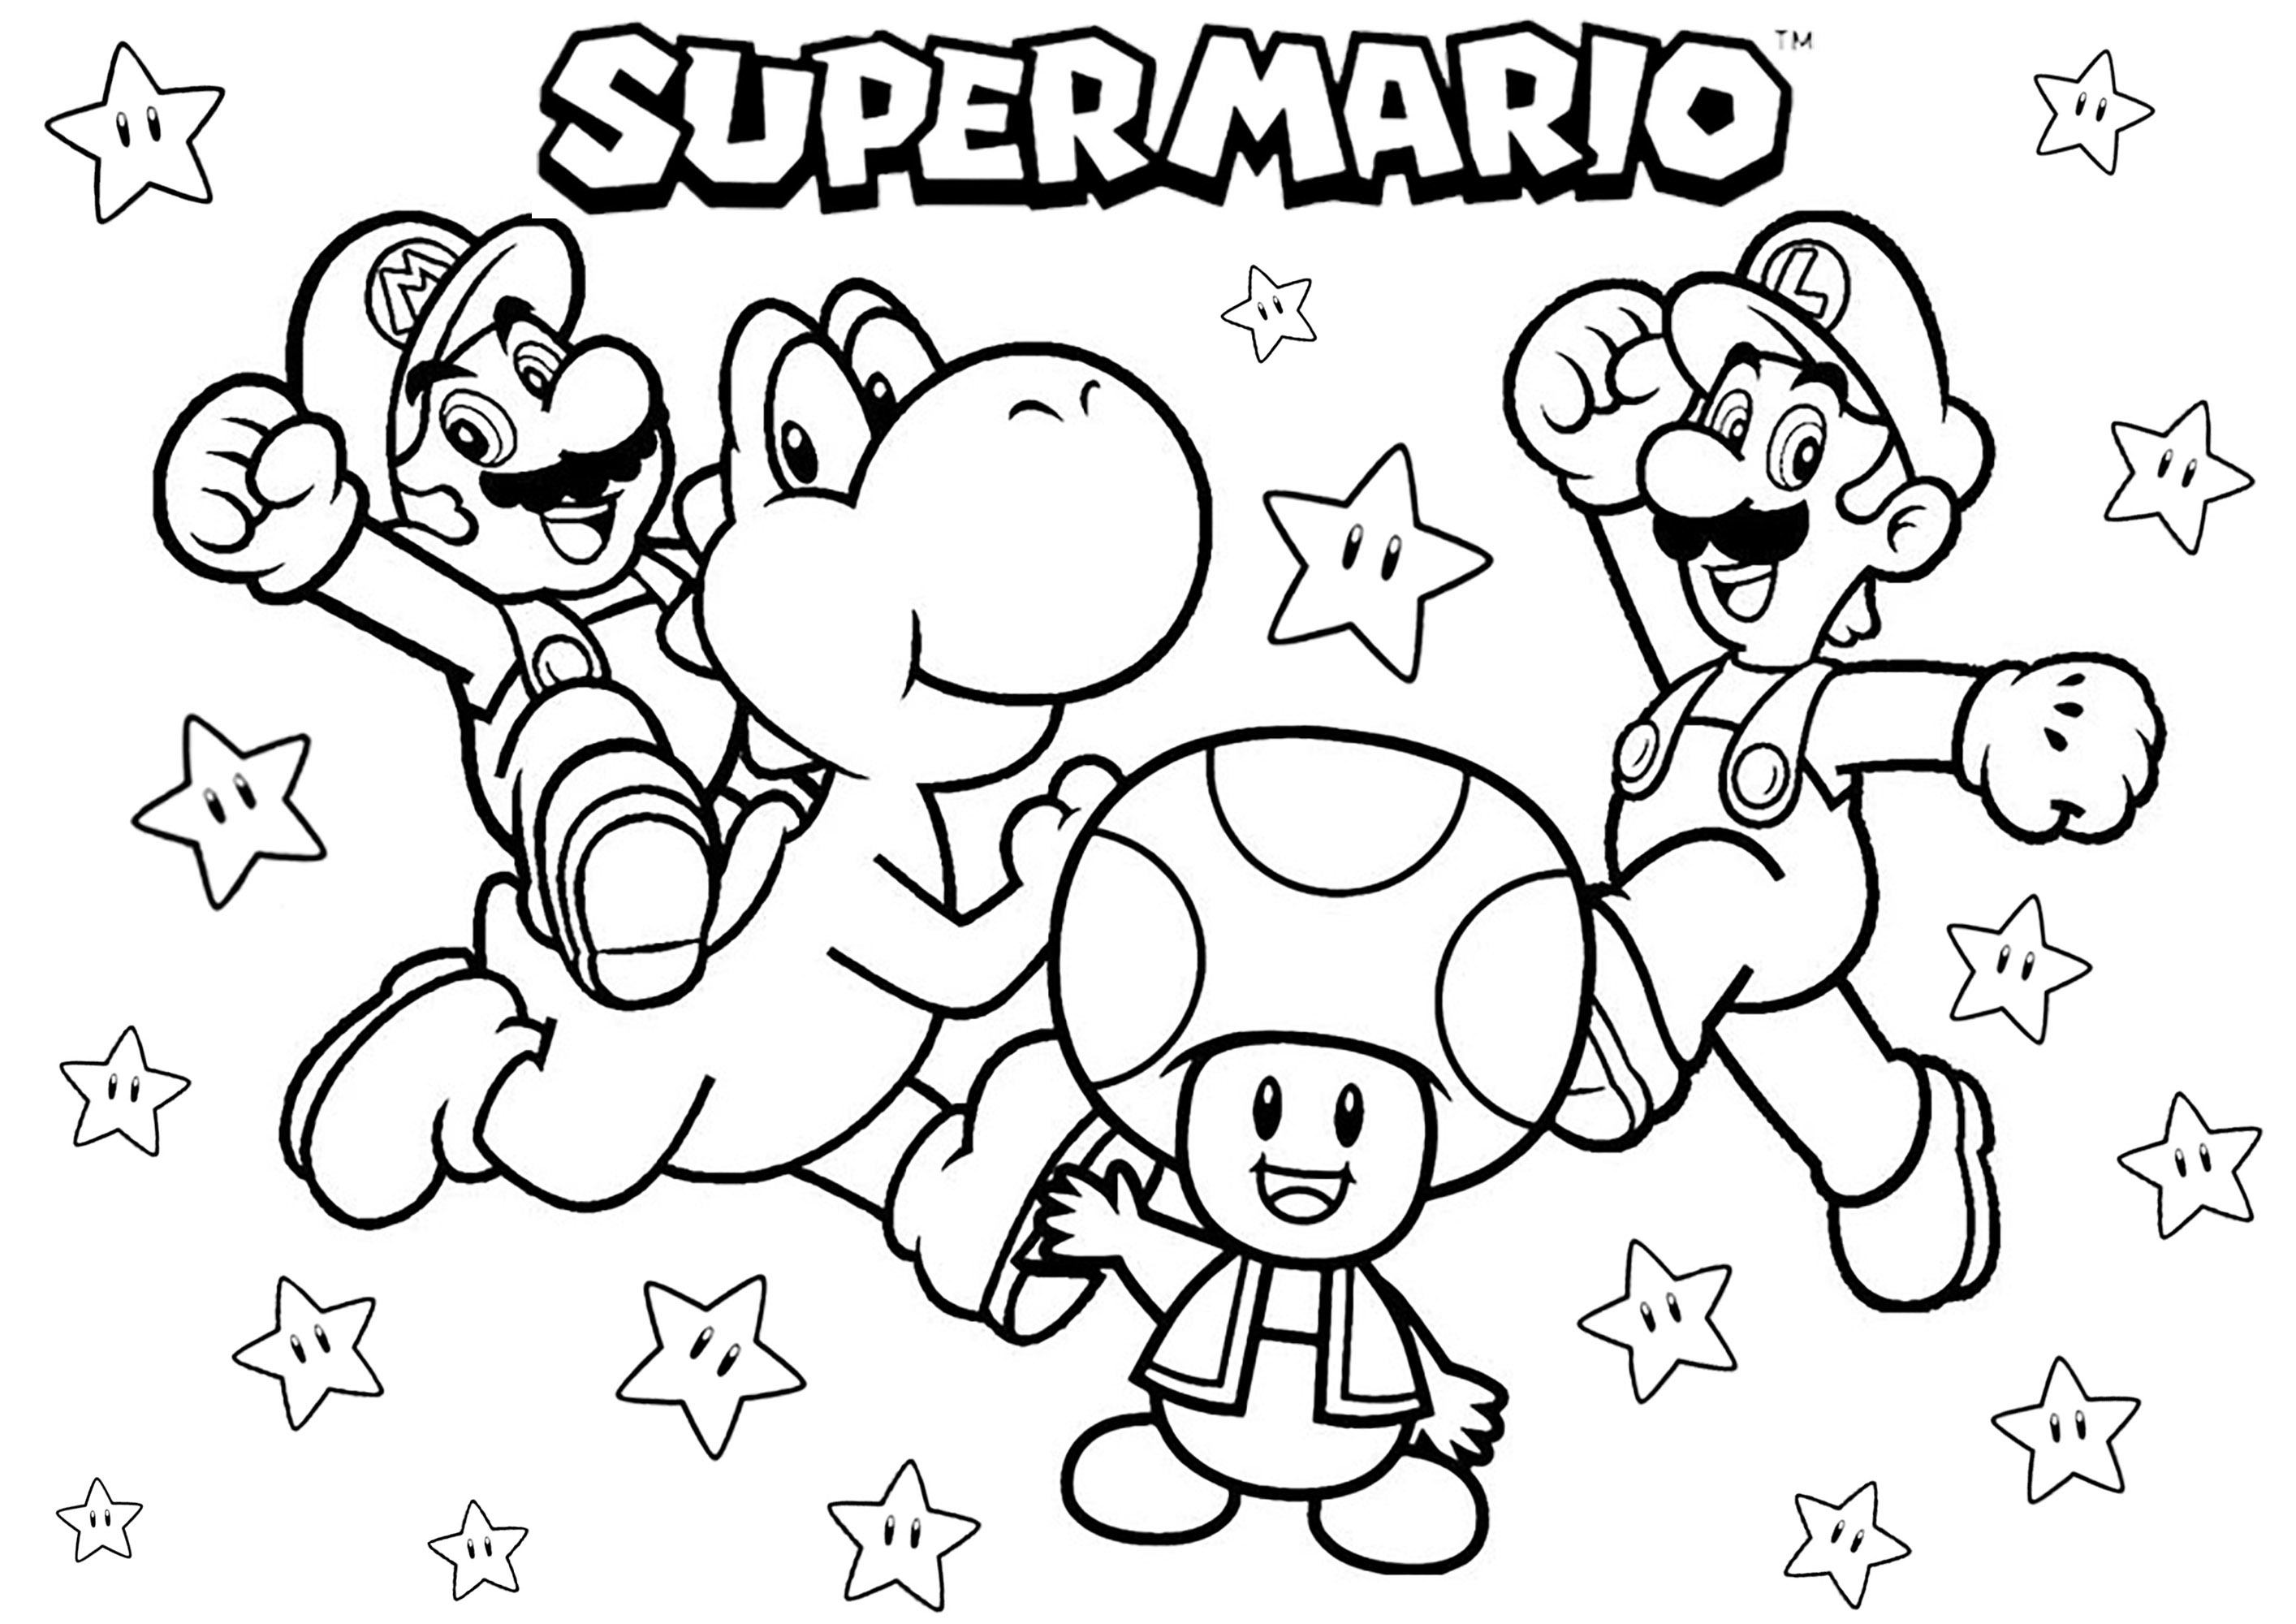 Mario, Luigi, Yoshi et Toad. Remember the days when you played Super Mario on your Nintendo system, thanks to this cute coloring page with the Mario and Luigi brothers, the dinosaur Yoshi and the mushroom Toad ... not to mention lots of stars!